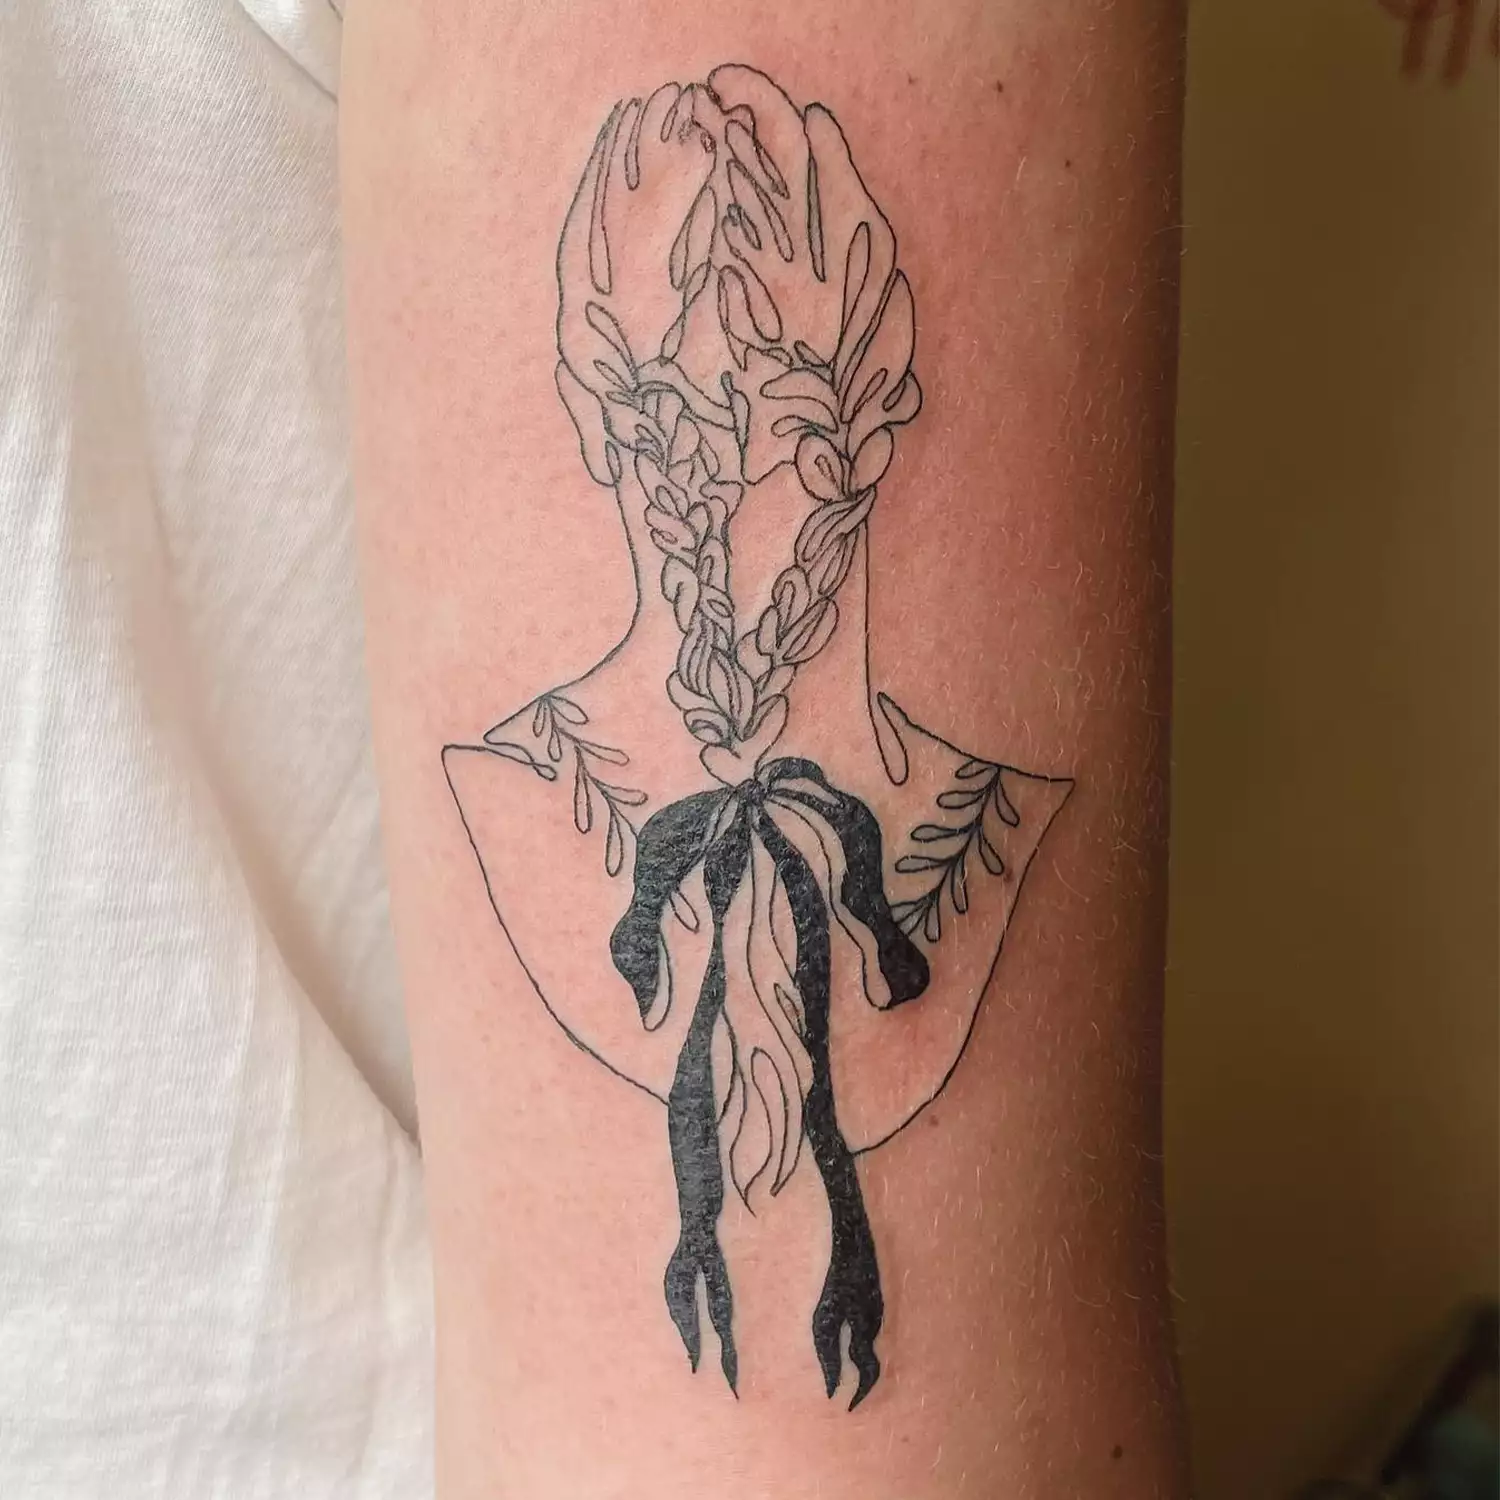 Tattoo of a bust with a bow